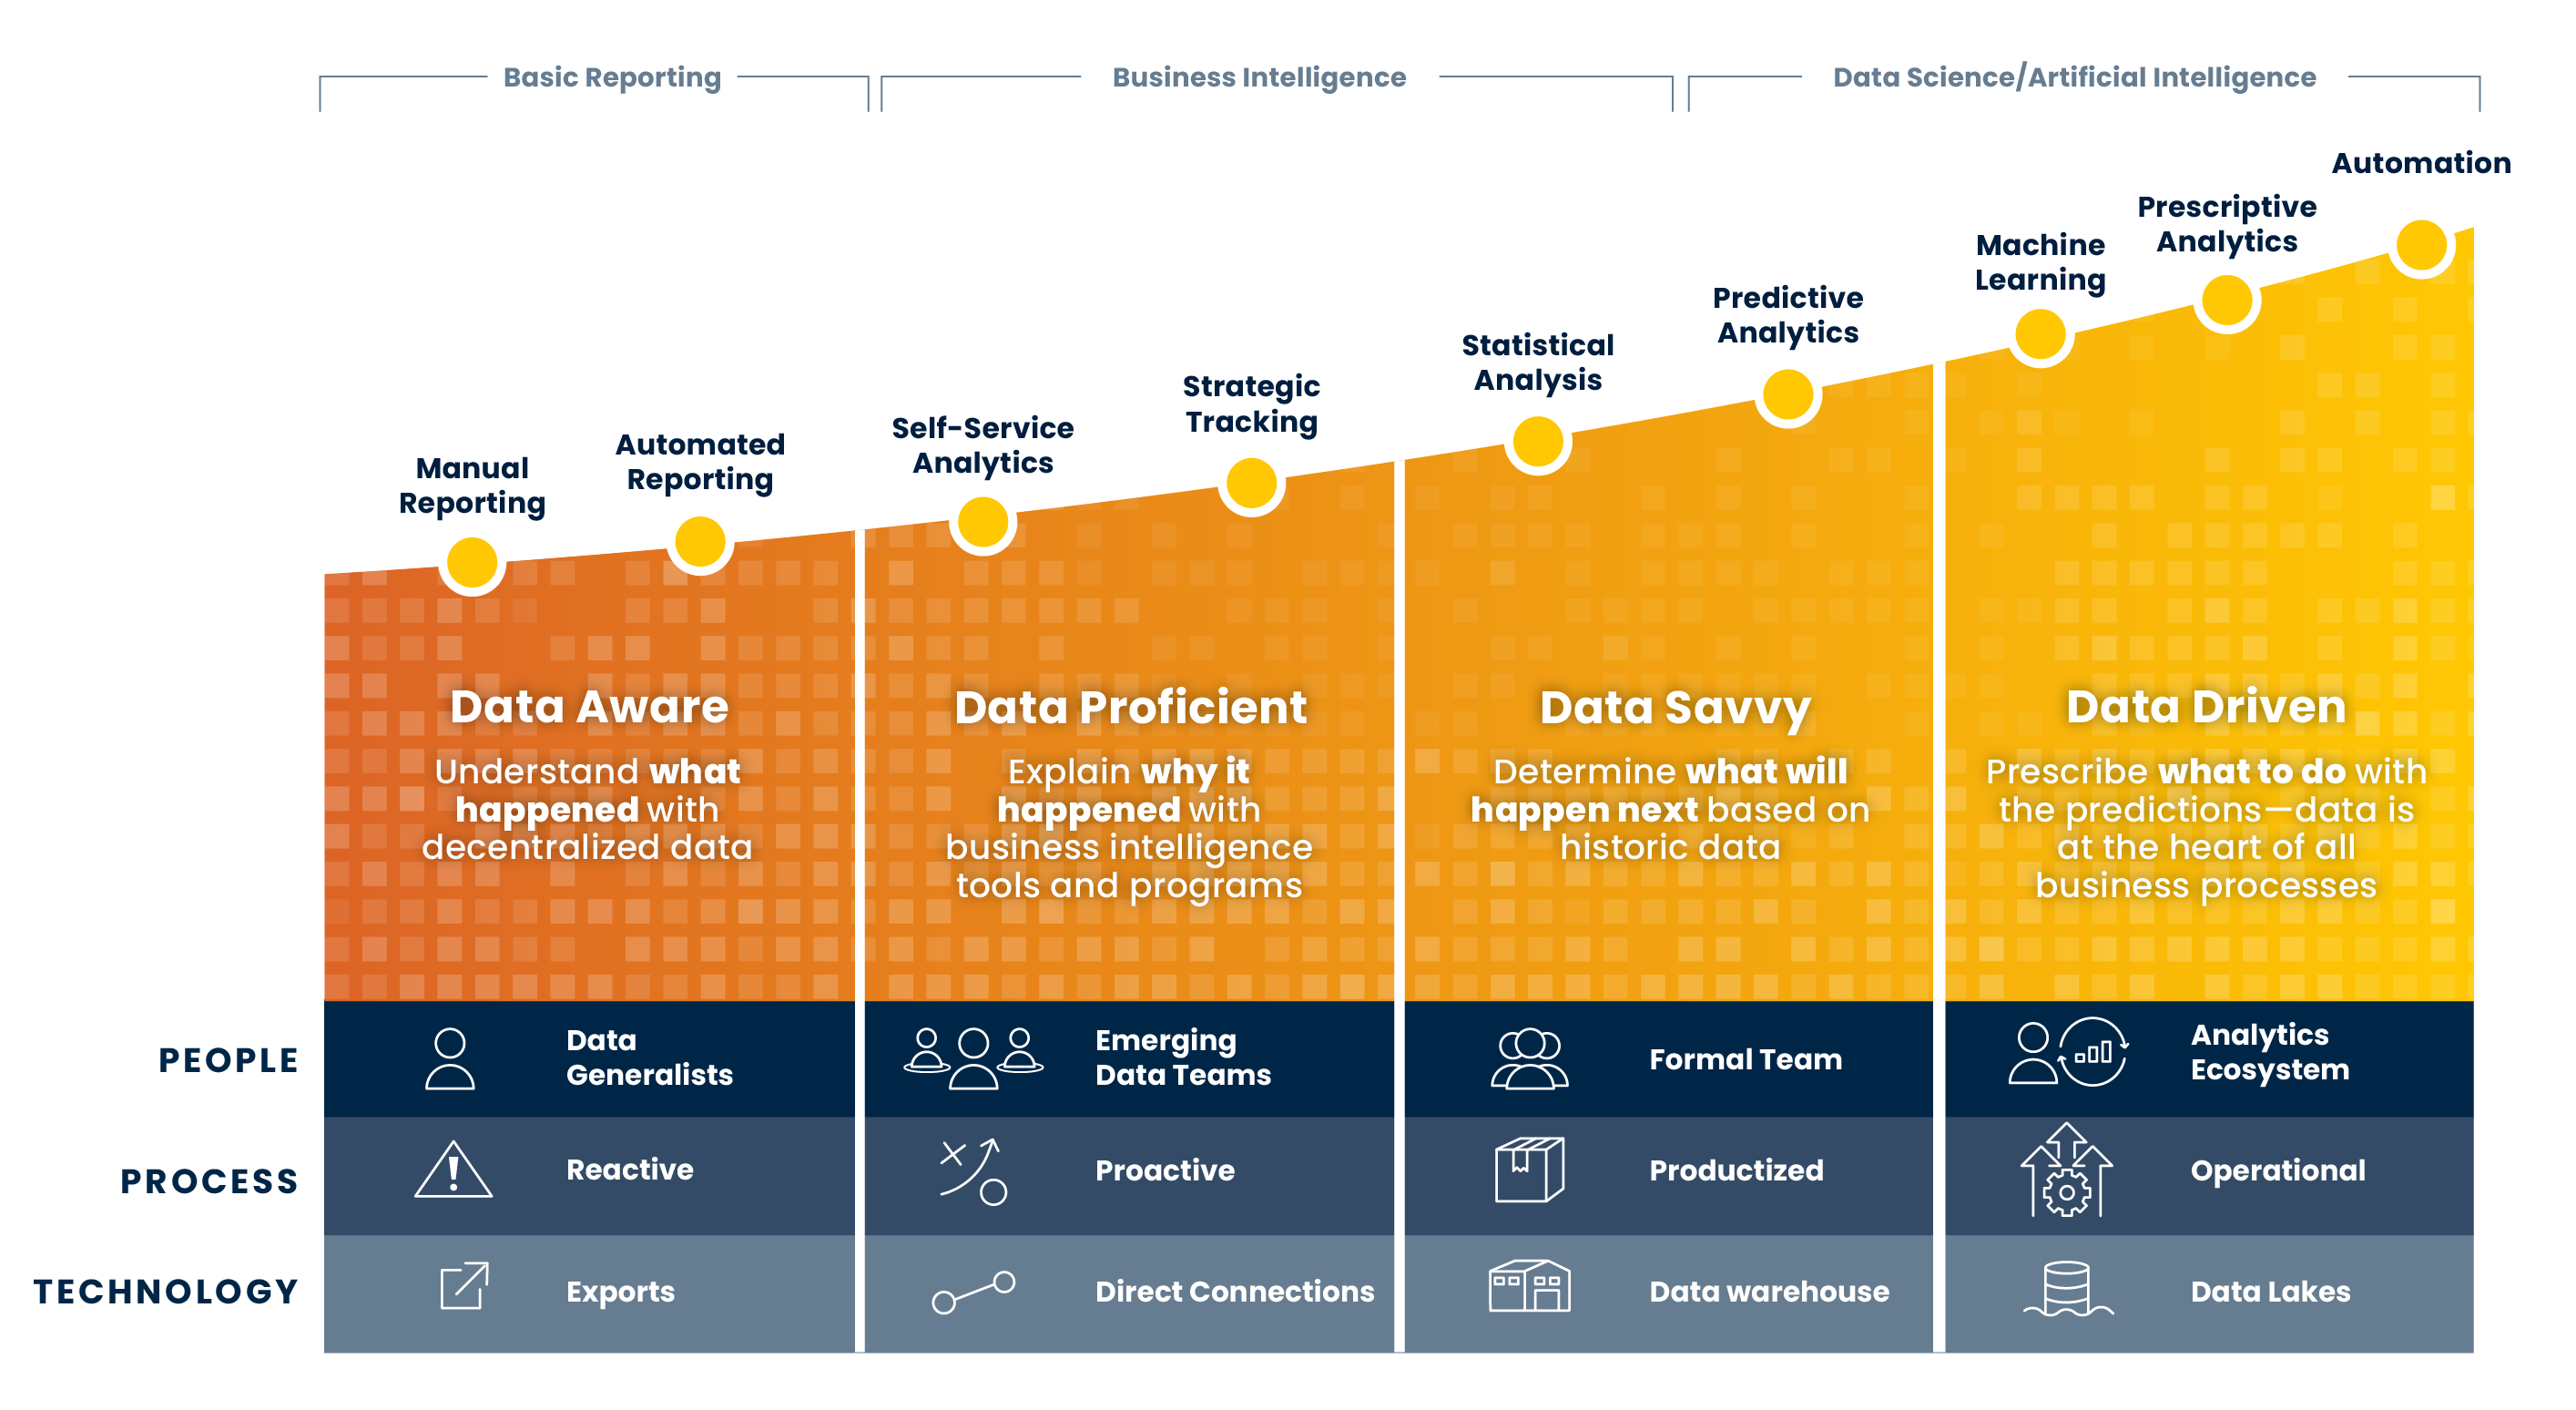 An infographic depicting the Data Analytics Journey through the 3 stages of basic reporting, business intelligence, and data science/AI